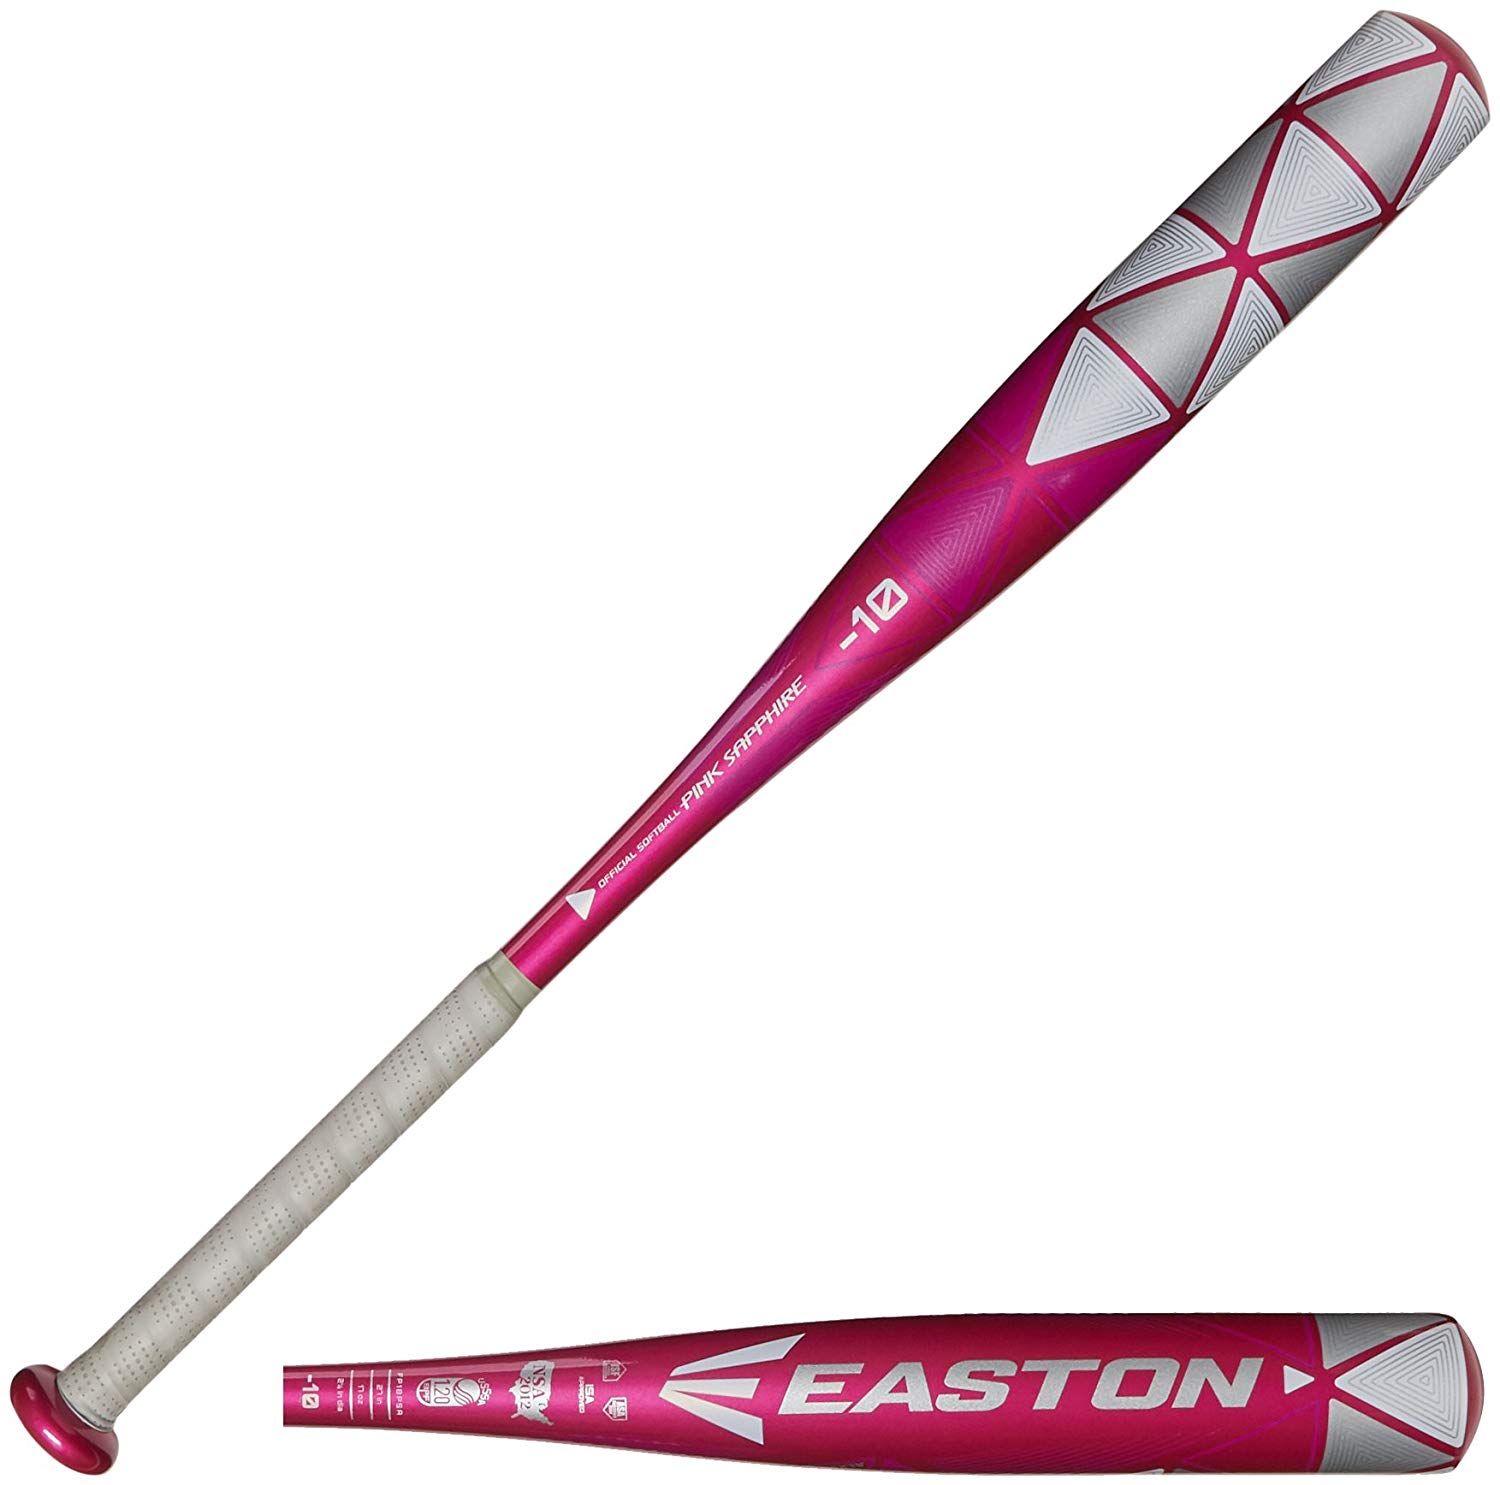 2020 EASTON HYPERSKIN Bat Grip 1.2mm Grip Customize Your Bat Specifically for You Textured Soft Surface Offers Enhanced Grip Bat Control for Baseball and Softball Bats